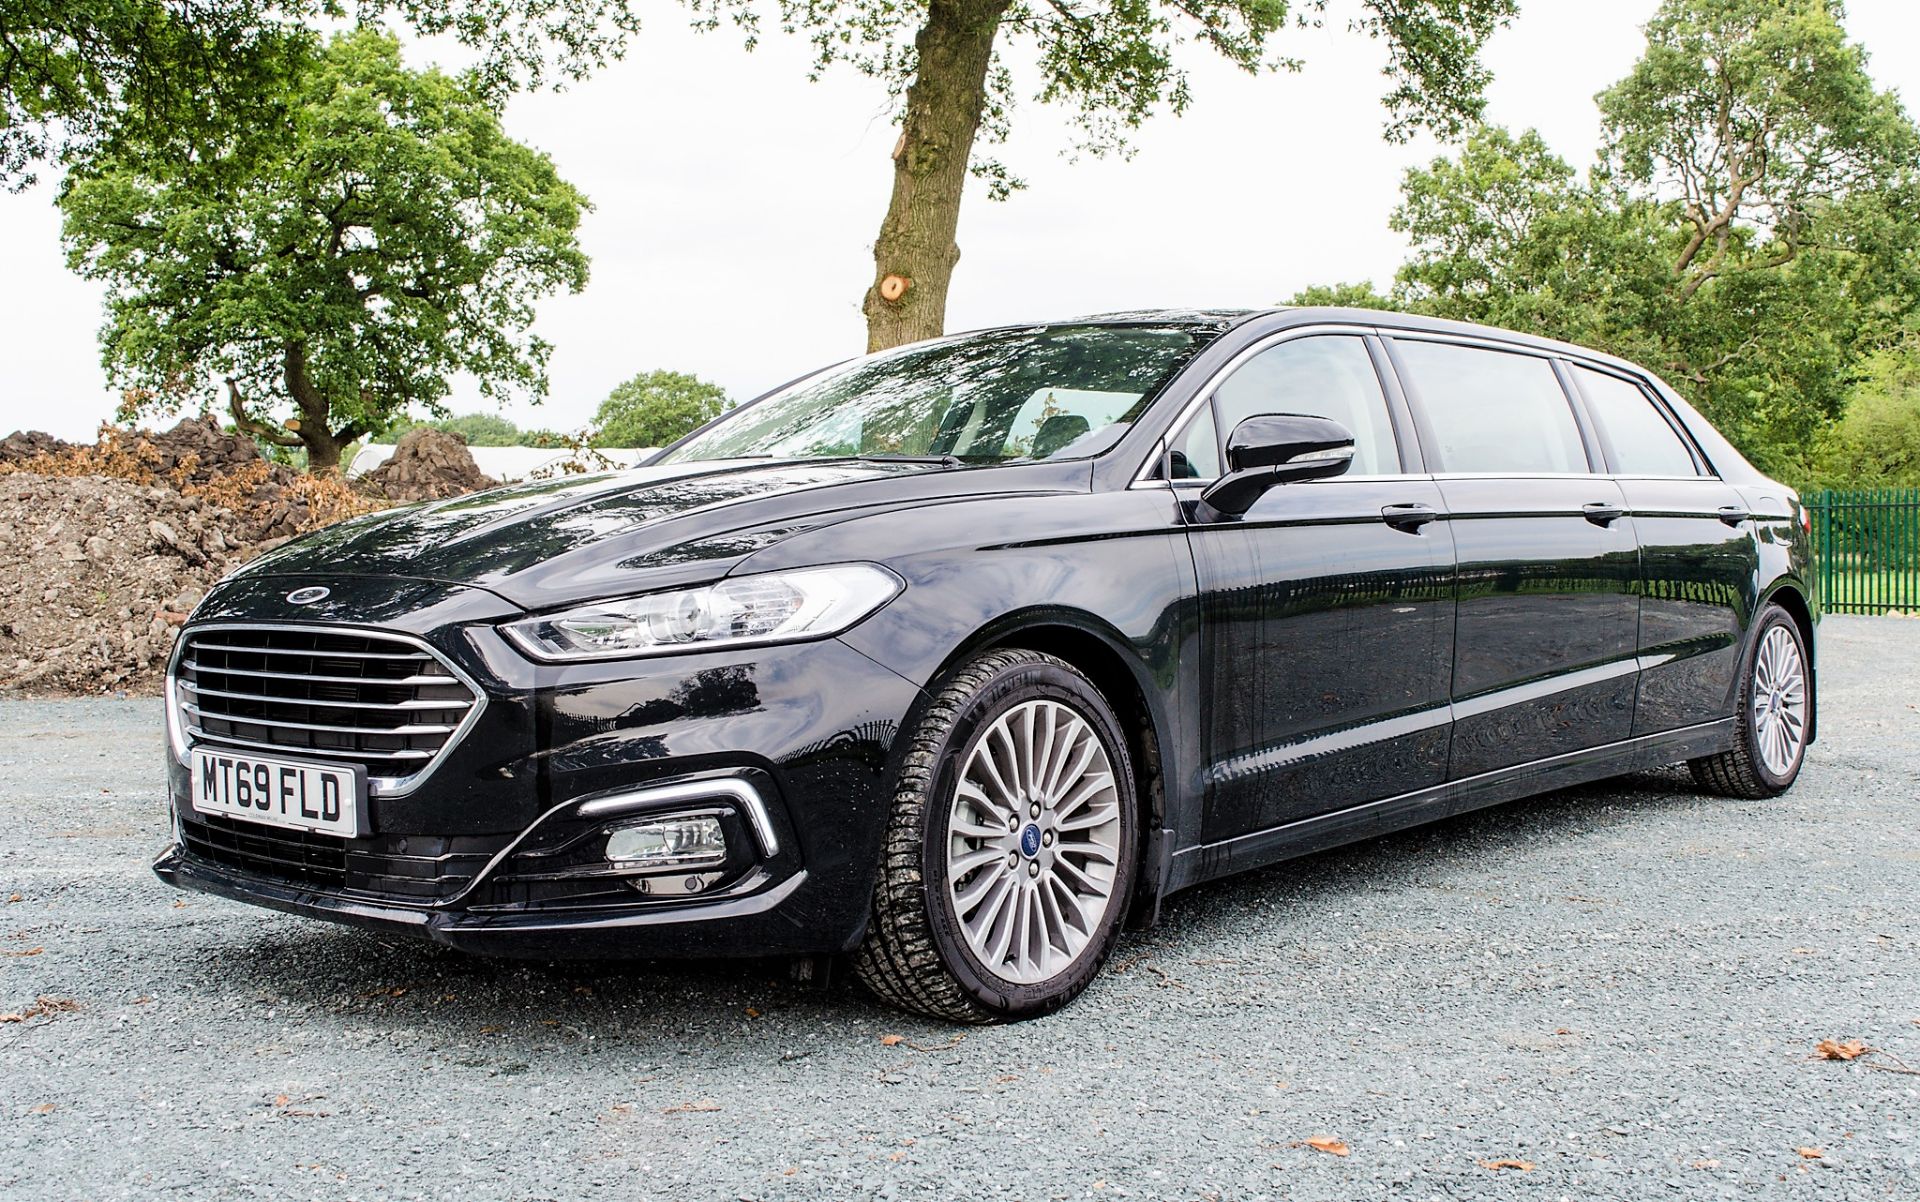 Ford Mondeo Coleman Milne Rosedale TDCI automatic,8 seat diesel limousine Registration Number: